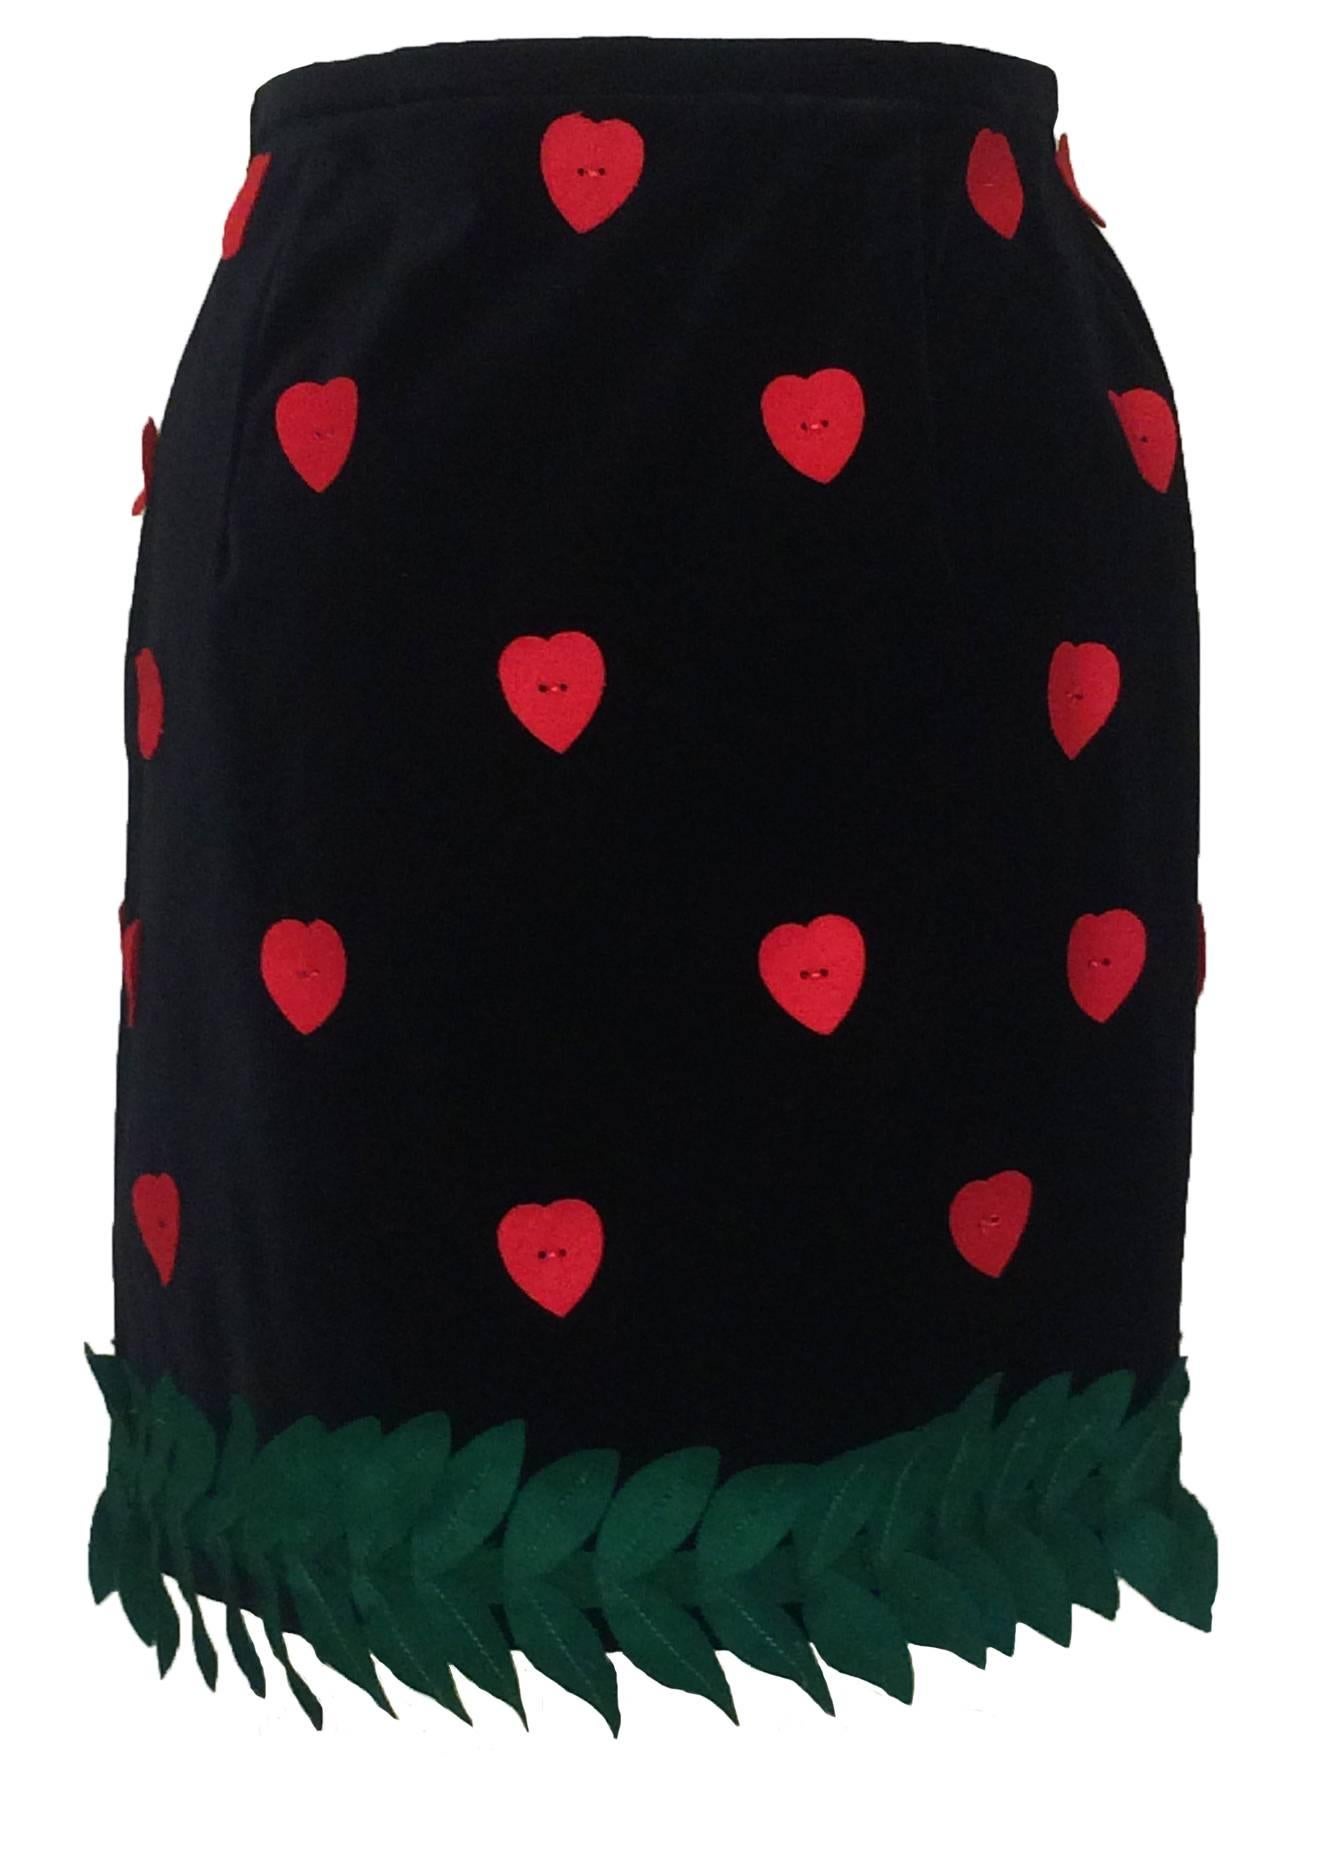 Moschino Cheap & Chic 1990s black velvet skirt featuring cut out hearts and leaves. Side zip.

Made in Italy.

98% cotton, 2% other. 

Size IT 44, US 10. Fits more like modern 4. Has some stretch.
Waist 26